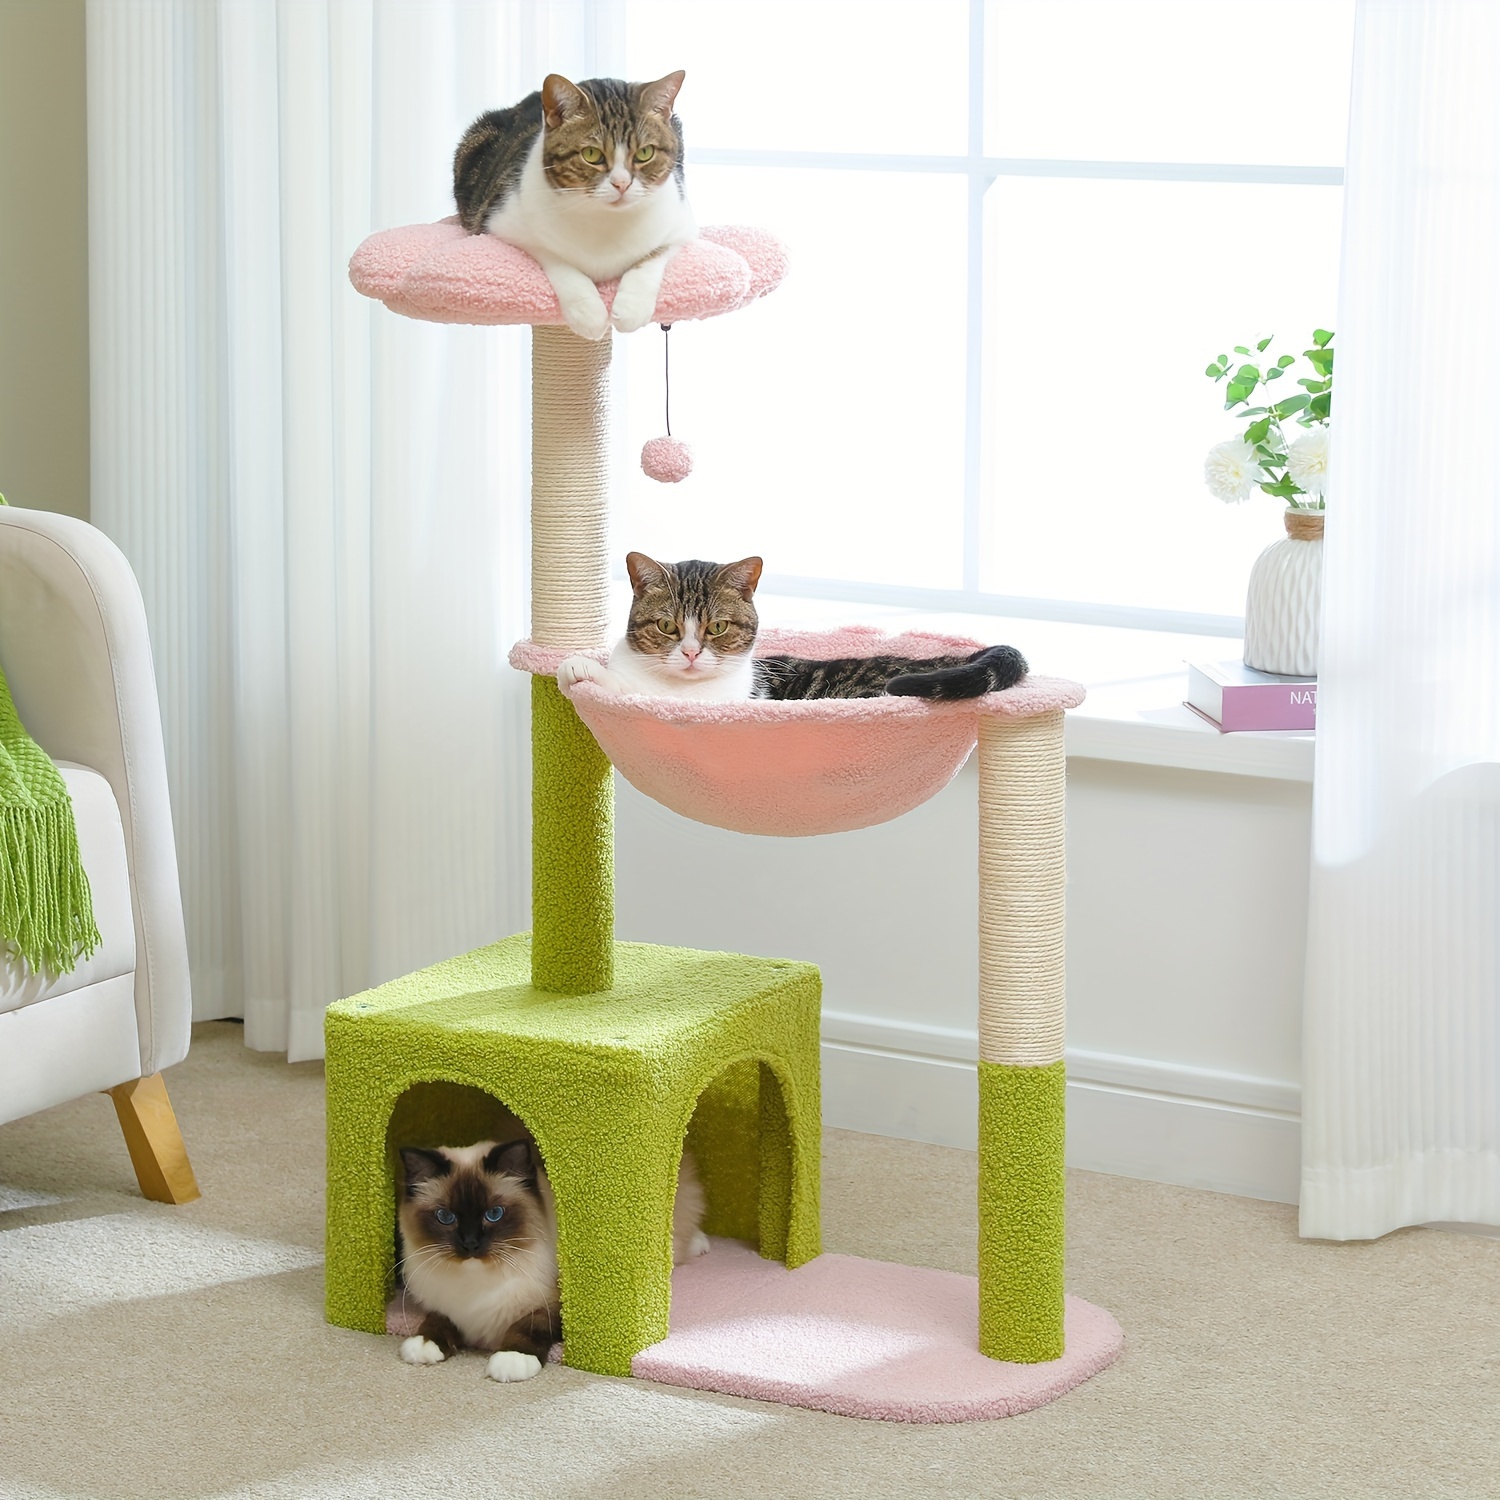 

Flower Cat Tree With Large Metal Frame Hammock, 36.6" Cute Cat Tower With Sisal Scratching Posts For Small Indoor Cats, Cat Condo With Pink Top Perch For Kittens